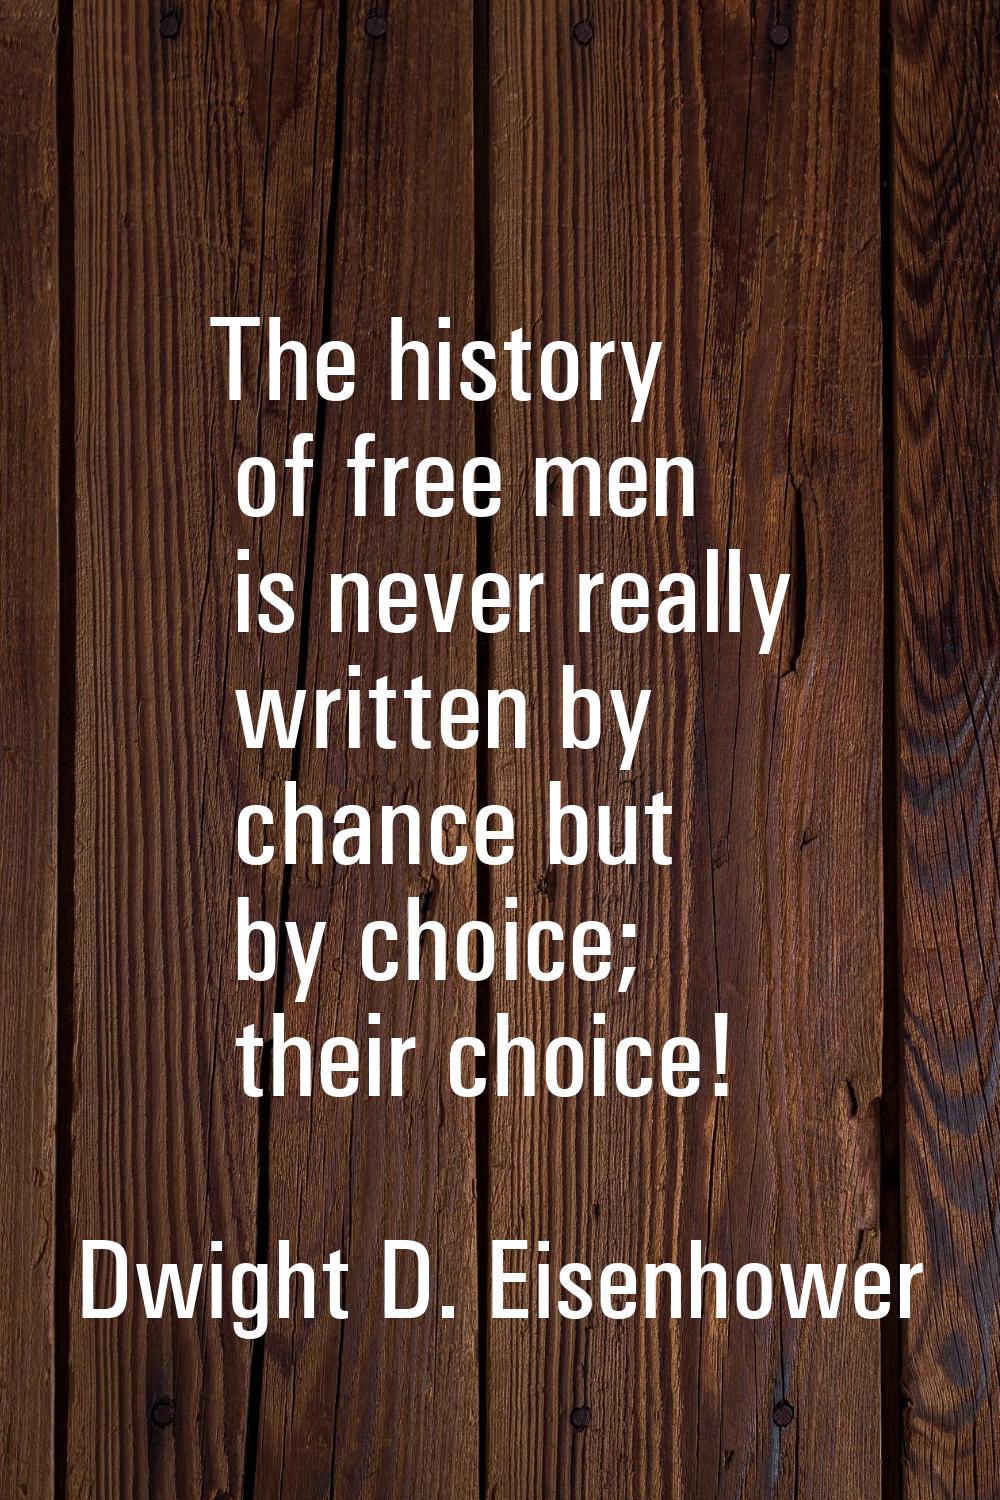 The history of free men is never really written by chance but by choice; their choice!